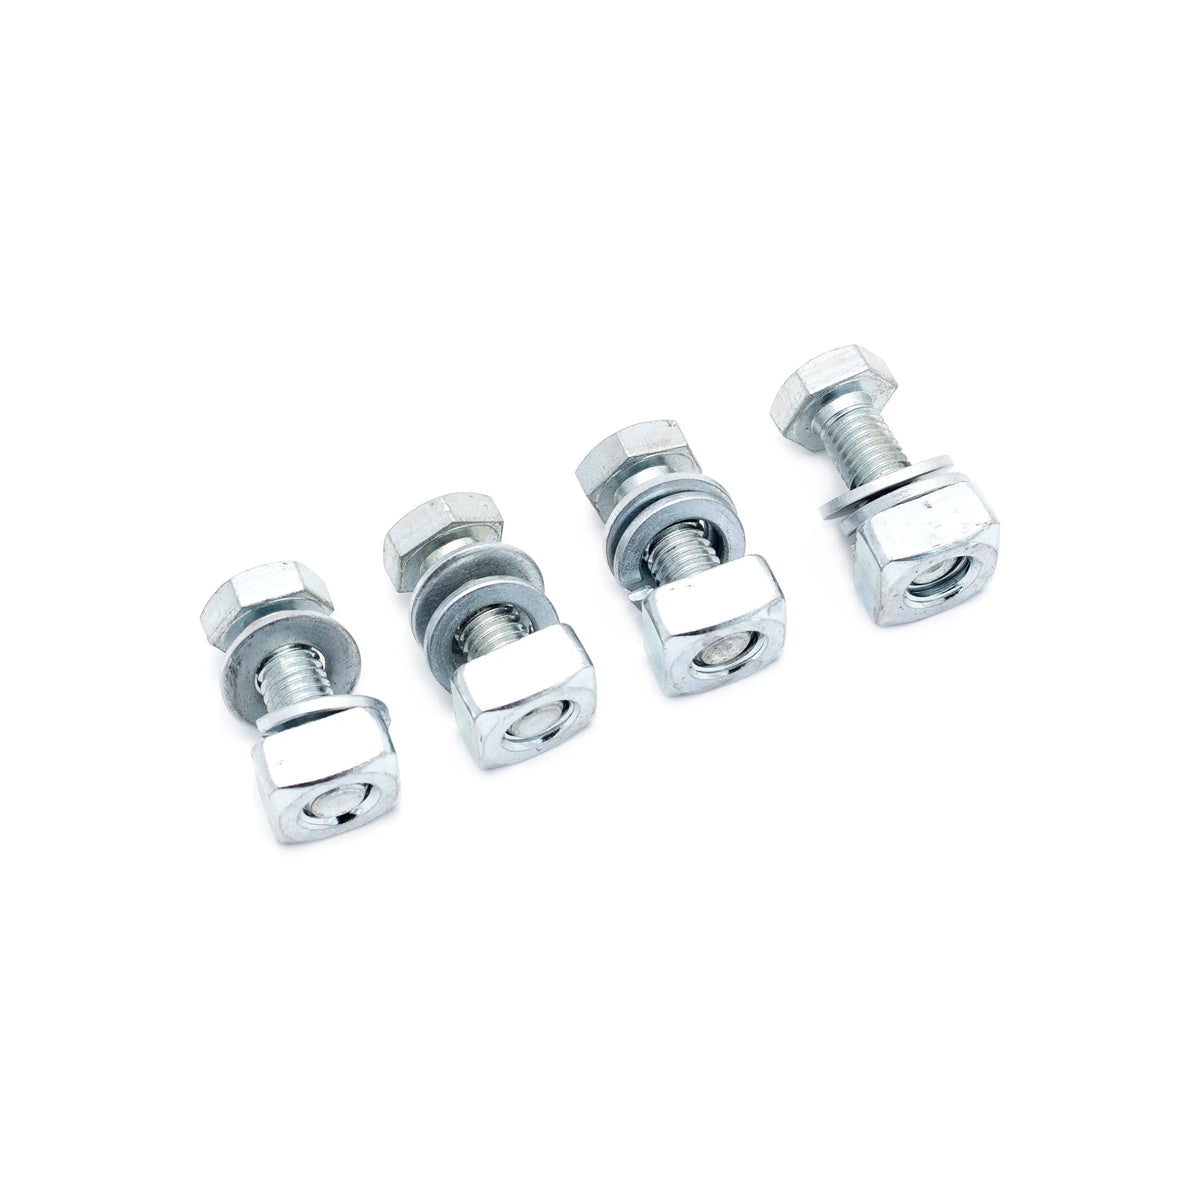 M8274 Mounting Hardware, Square Nuts and Bolts kit Gigglepin